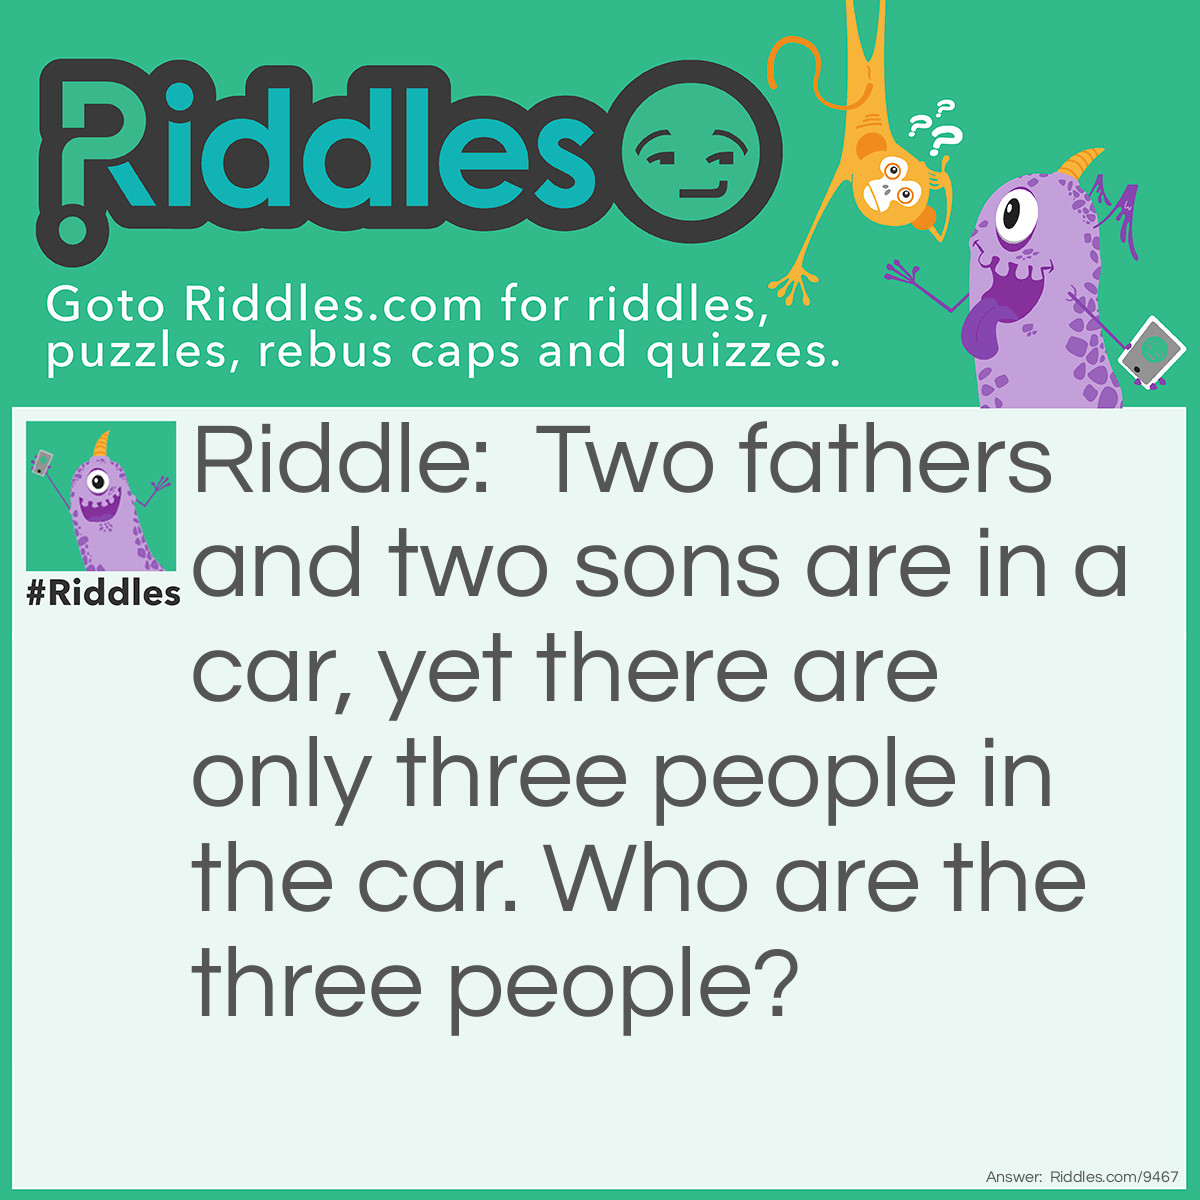 Riddle: Two fathers and two sons are in a car, yet there are only three people in the car. Who are the three people? Answer: They are grandfather, father, and son.